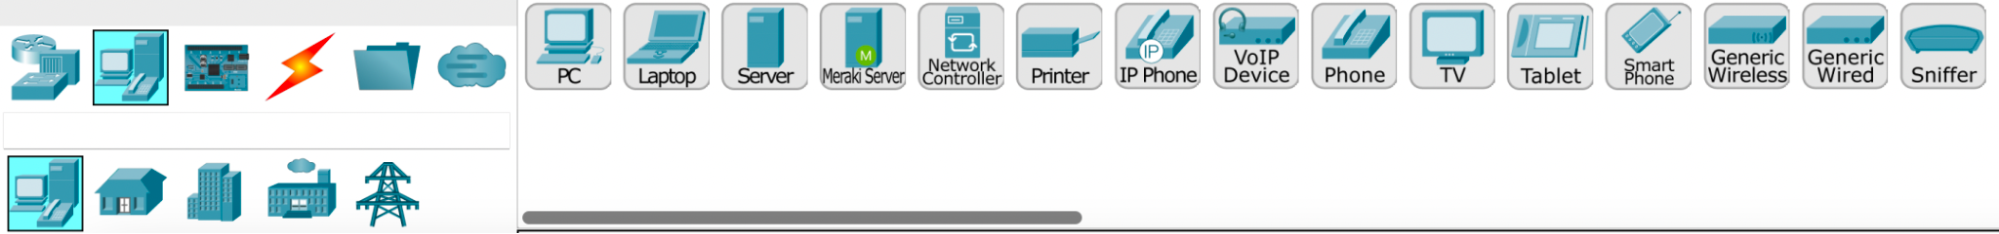 Screenshot of the end devices icons in Cisco Packet Tracer